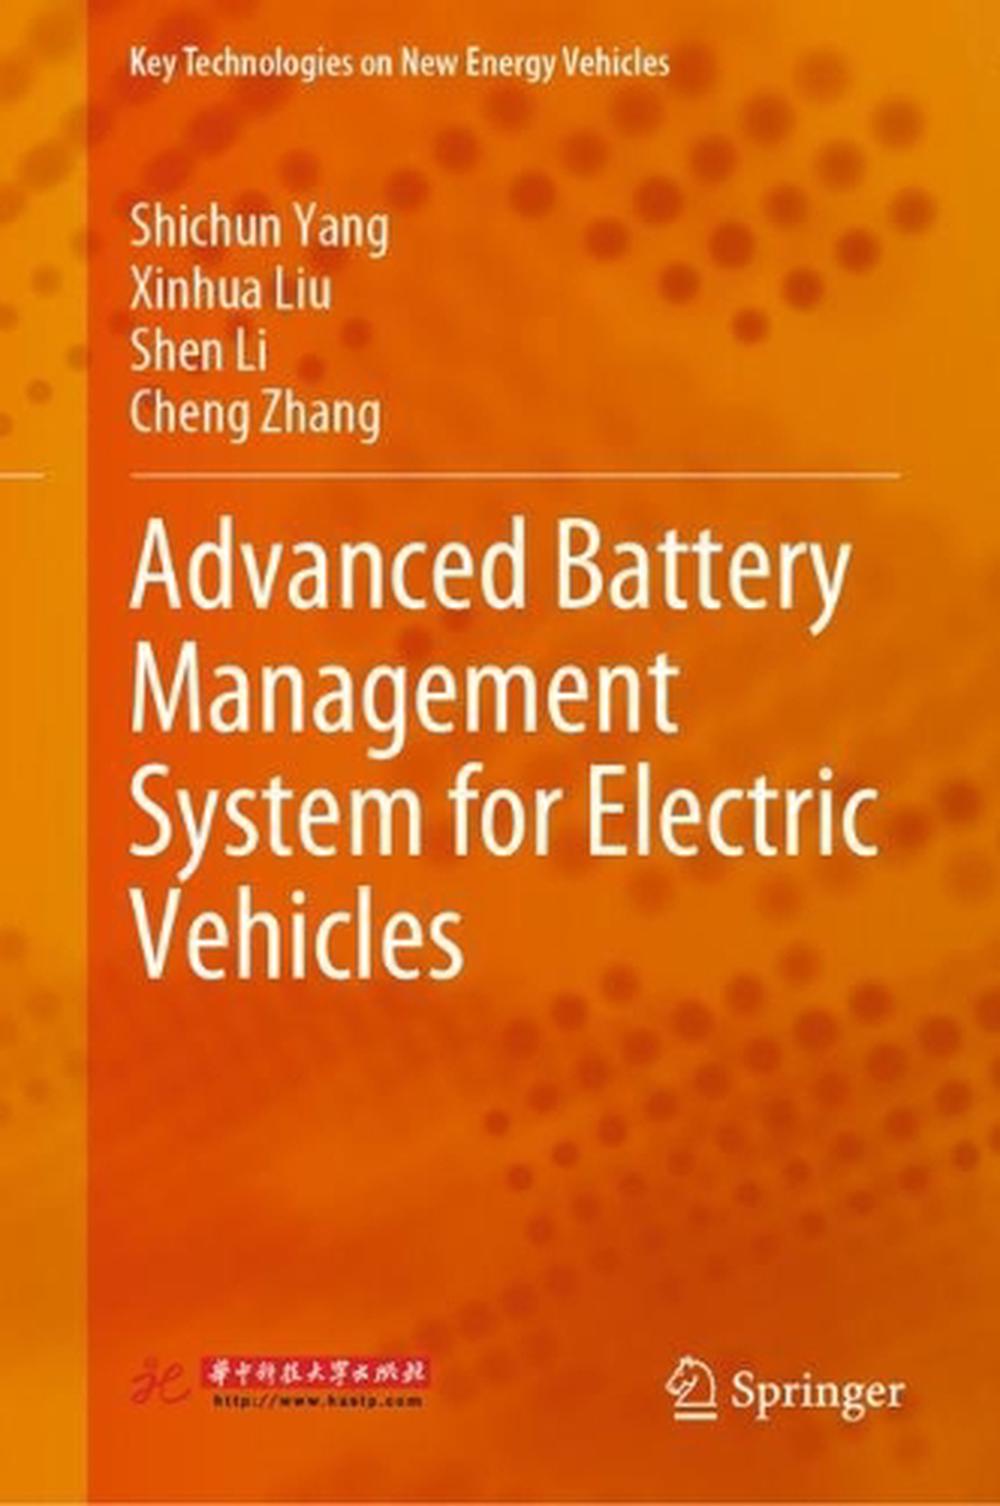 Advanced Battery Management System for Electric Vehicles by Shichun